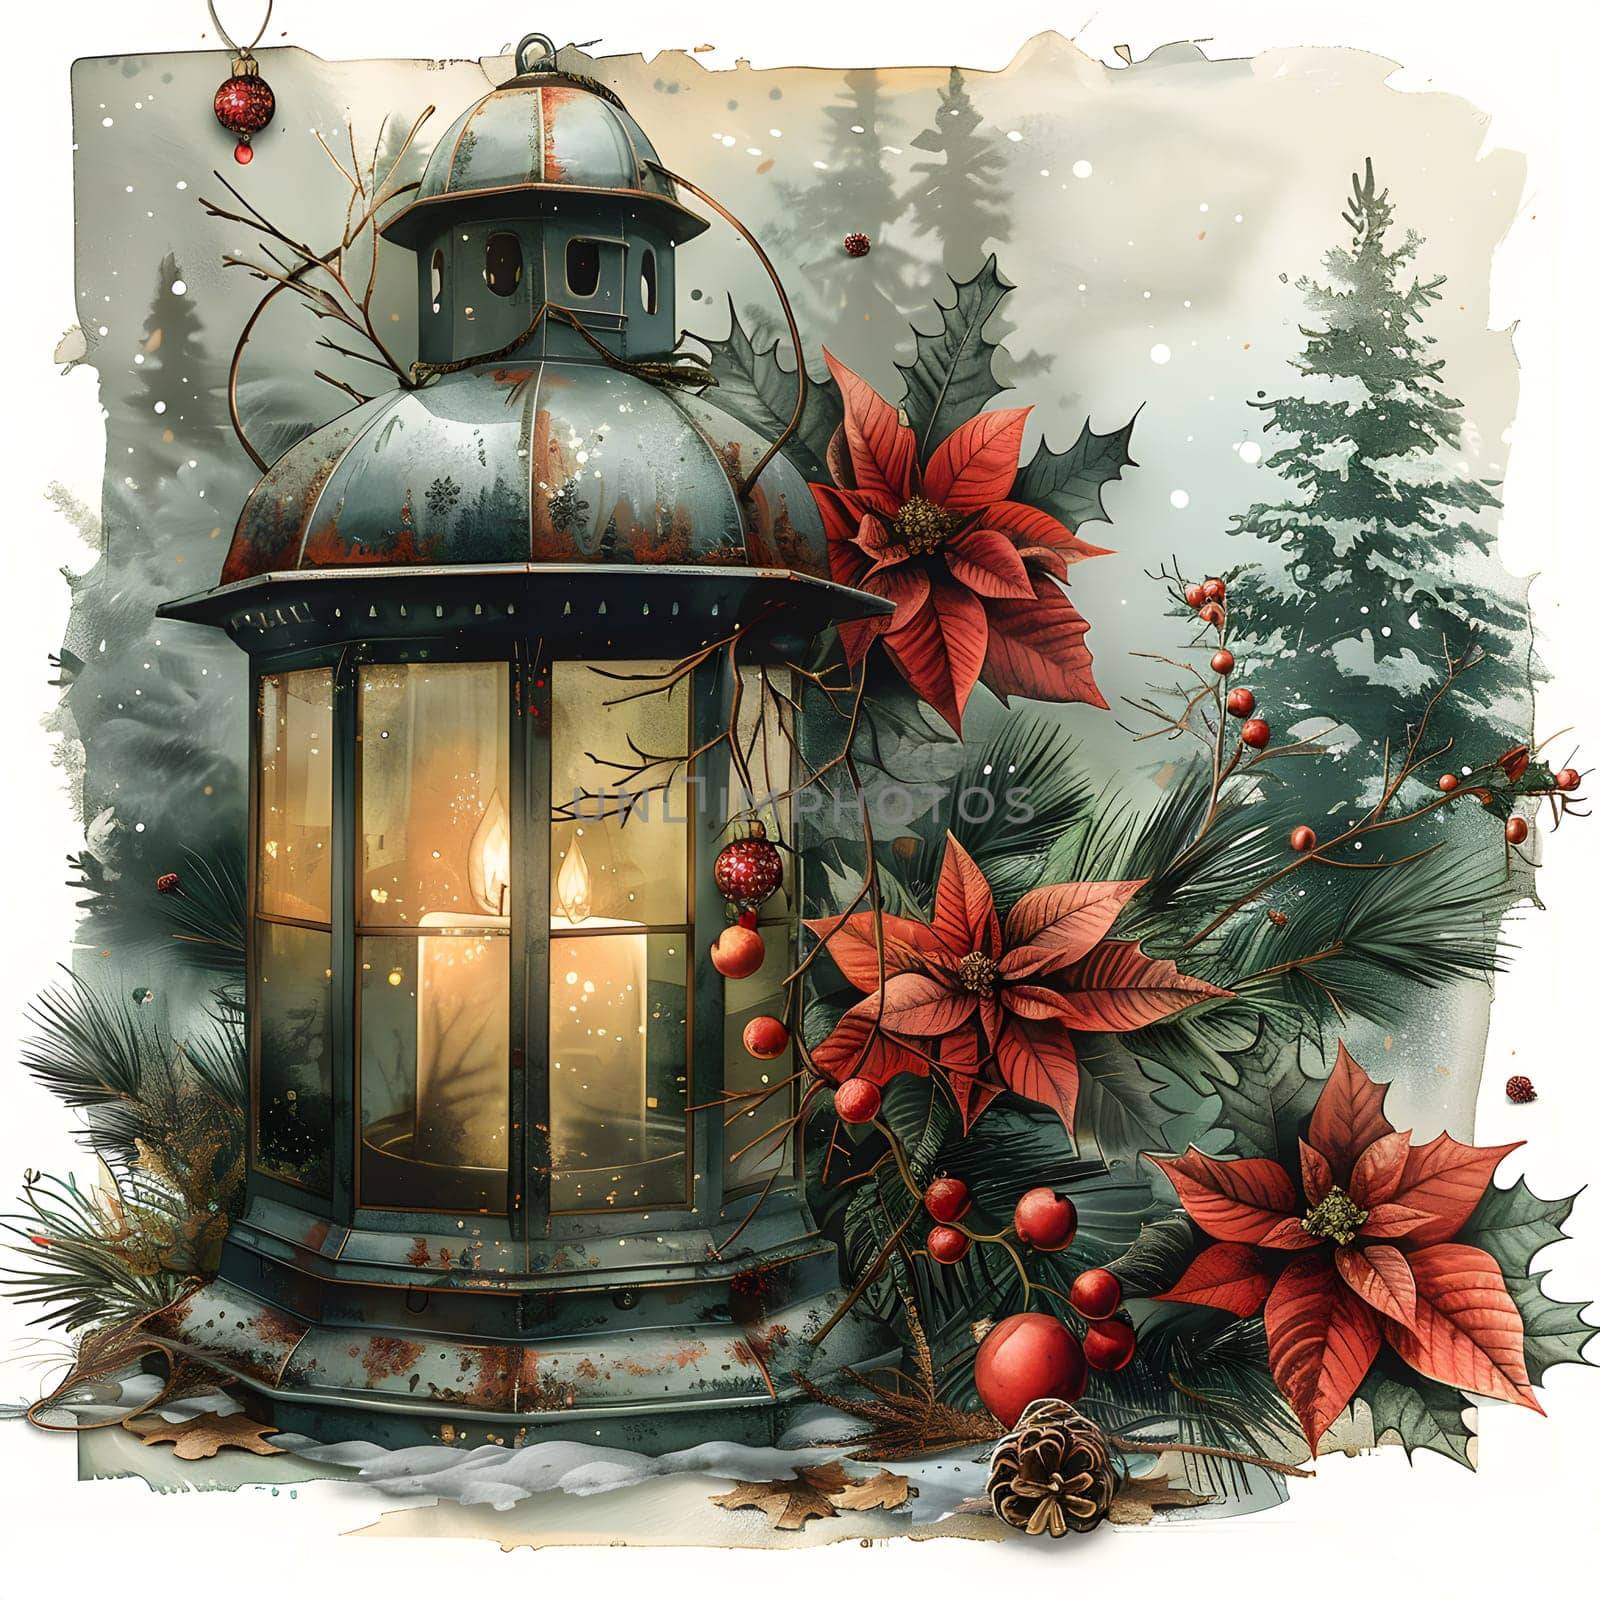 A lantern surrounded by evergreen branches, poinsettias, and pine cones by Nadtochiy